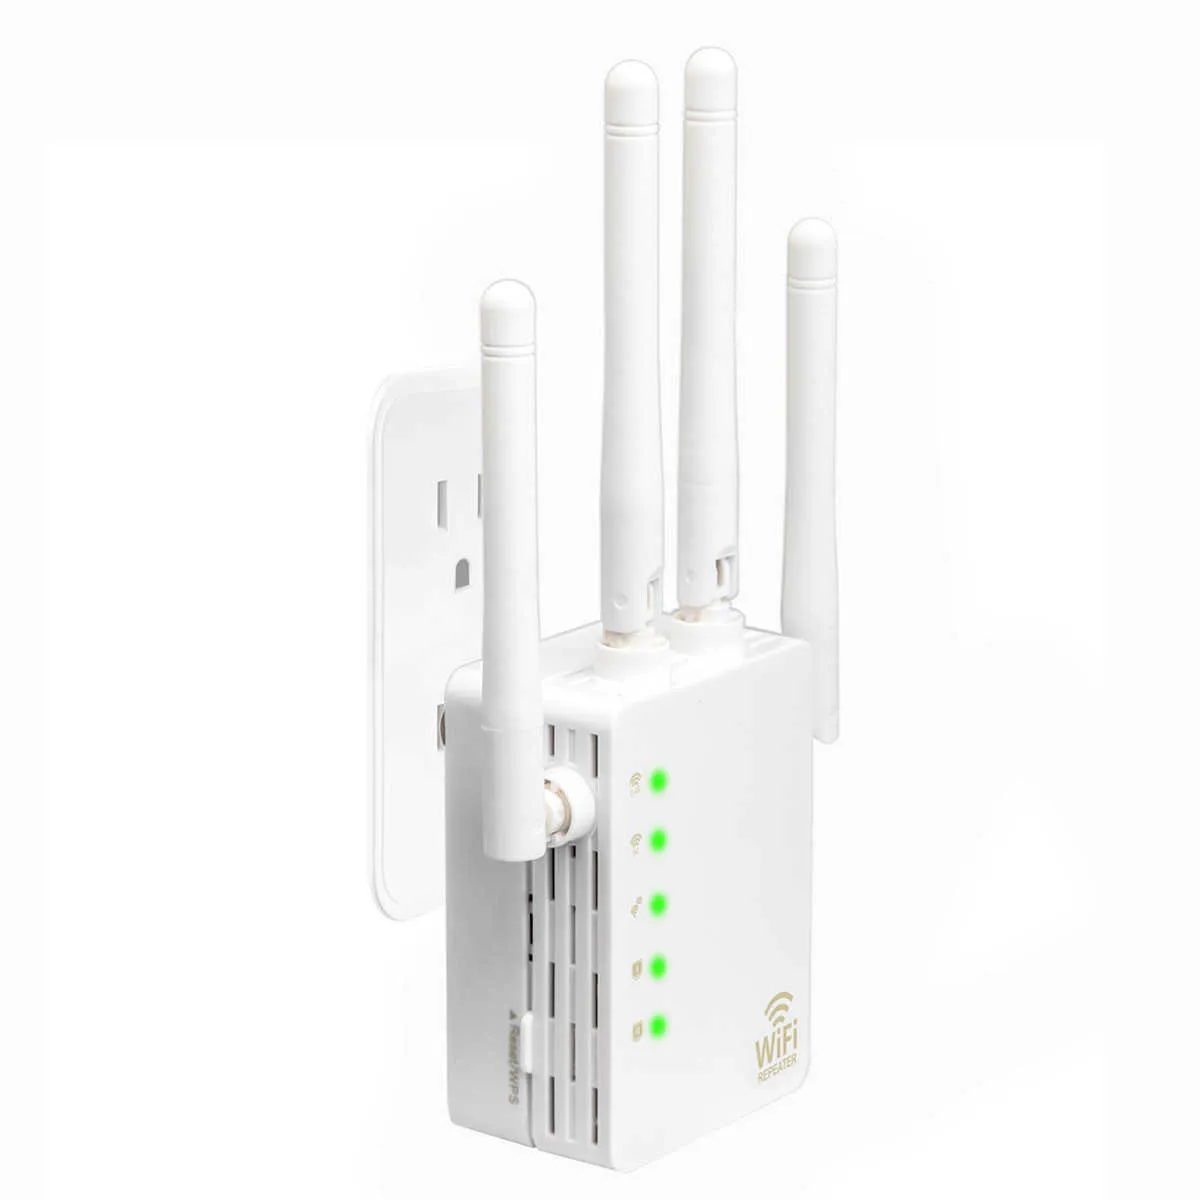 Dual Band 1200M WIFI Amblifier Amplifier Extender WiFi Repeater 5G